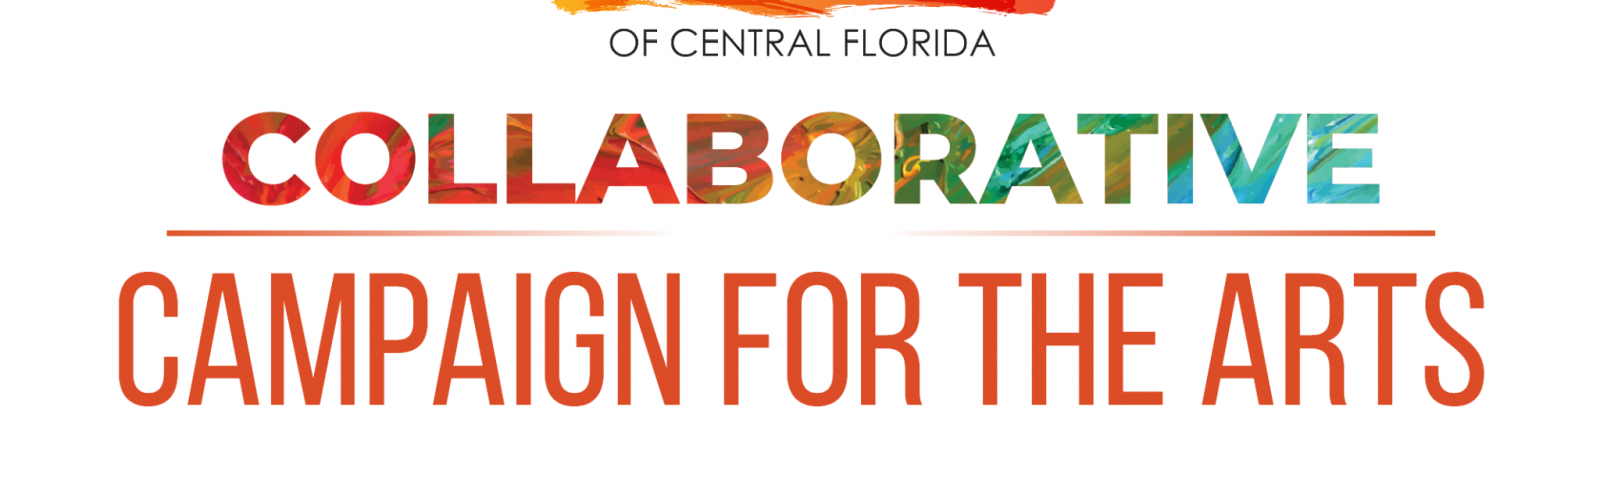 2023 COLLABORATIVE CAMPAIGN FOR THE ARTS REACHES $6 MILLION GOAL FOR ARTS AND CULTURE IN CENTRAL FLORIDA